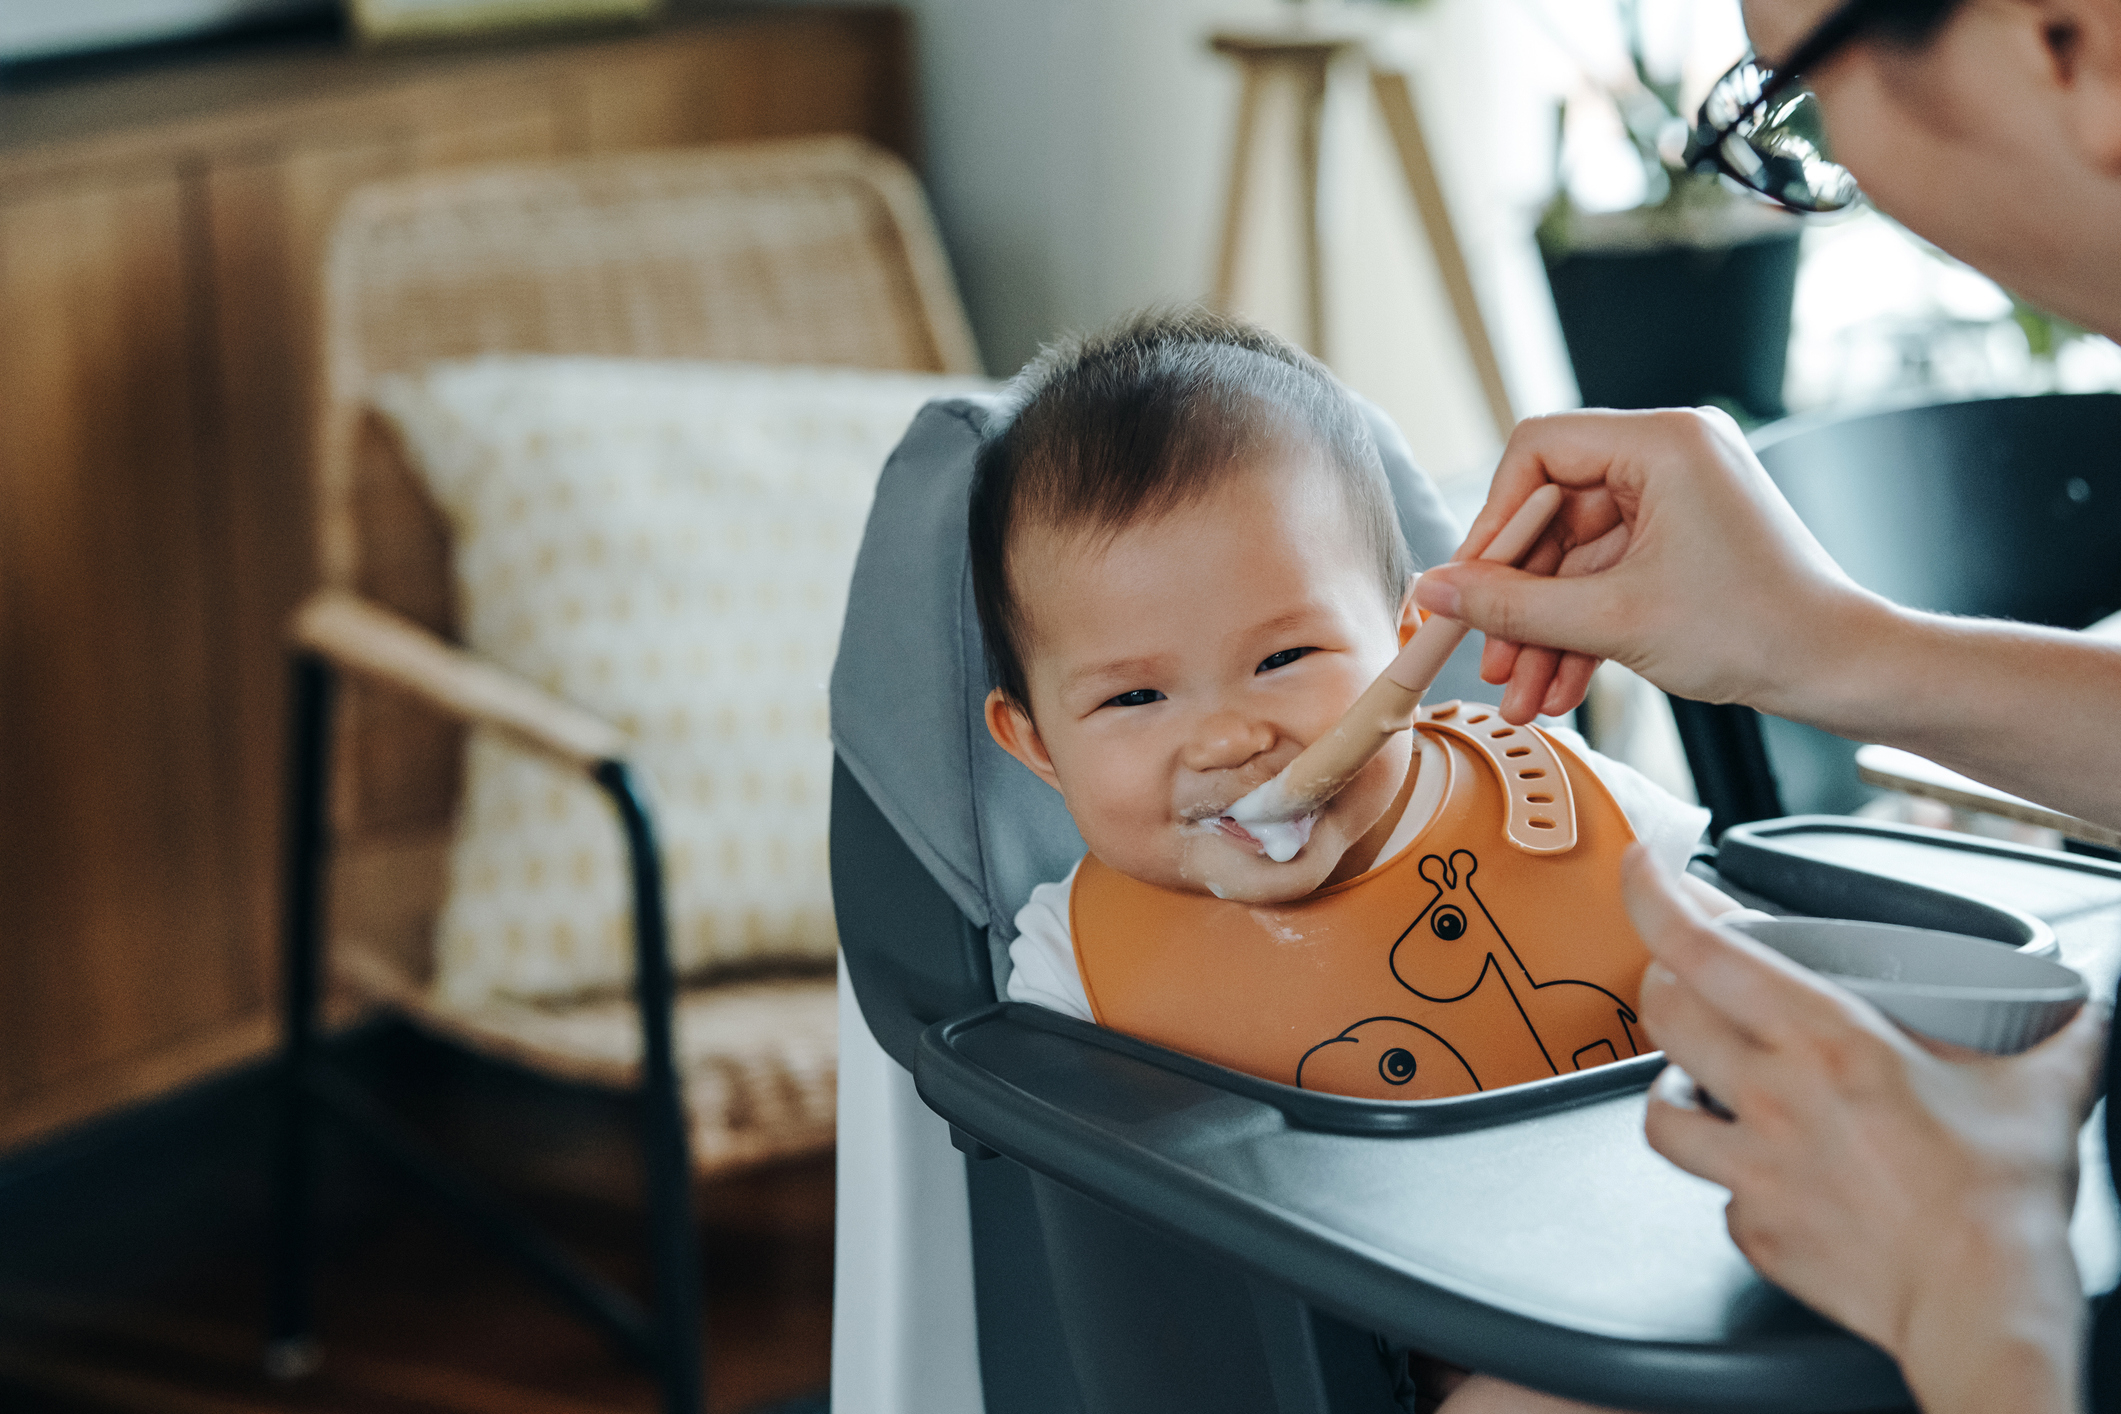 Baby being fed in a high chair, smiling with a bib on